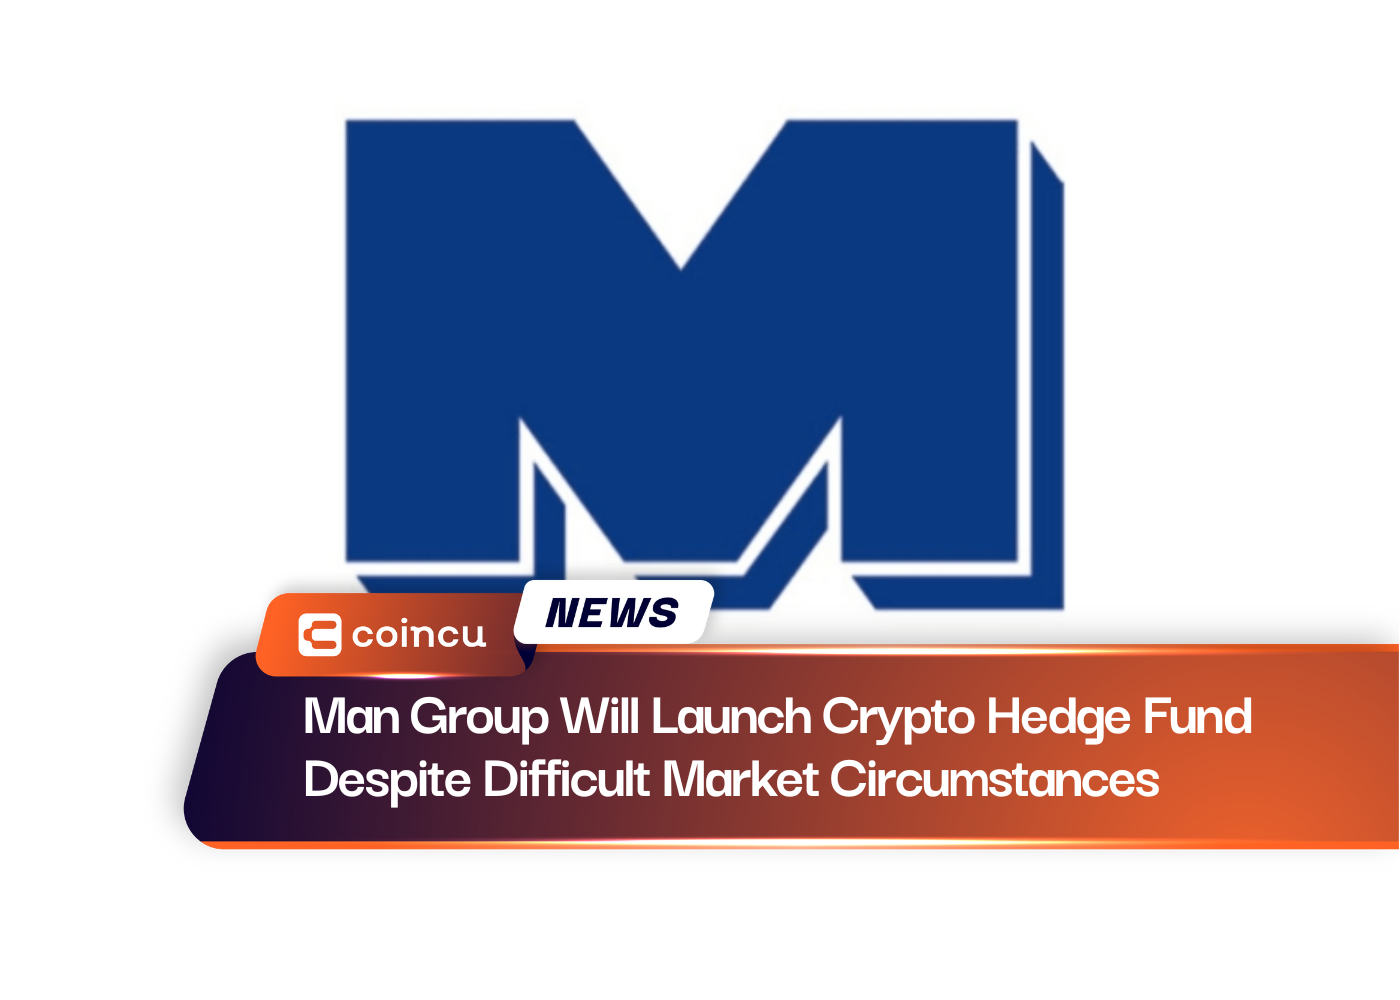 Man Group Will Launch Crypto Hedge Fund Despite Difficult Market Circumstances